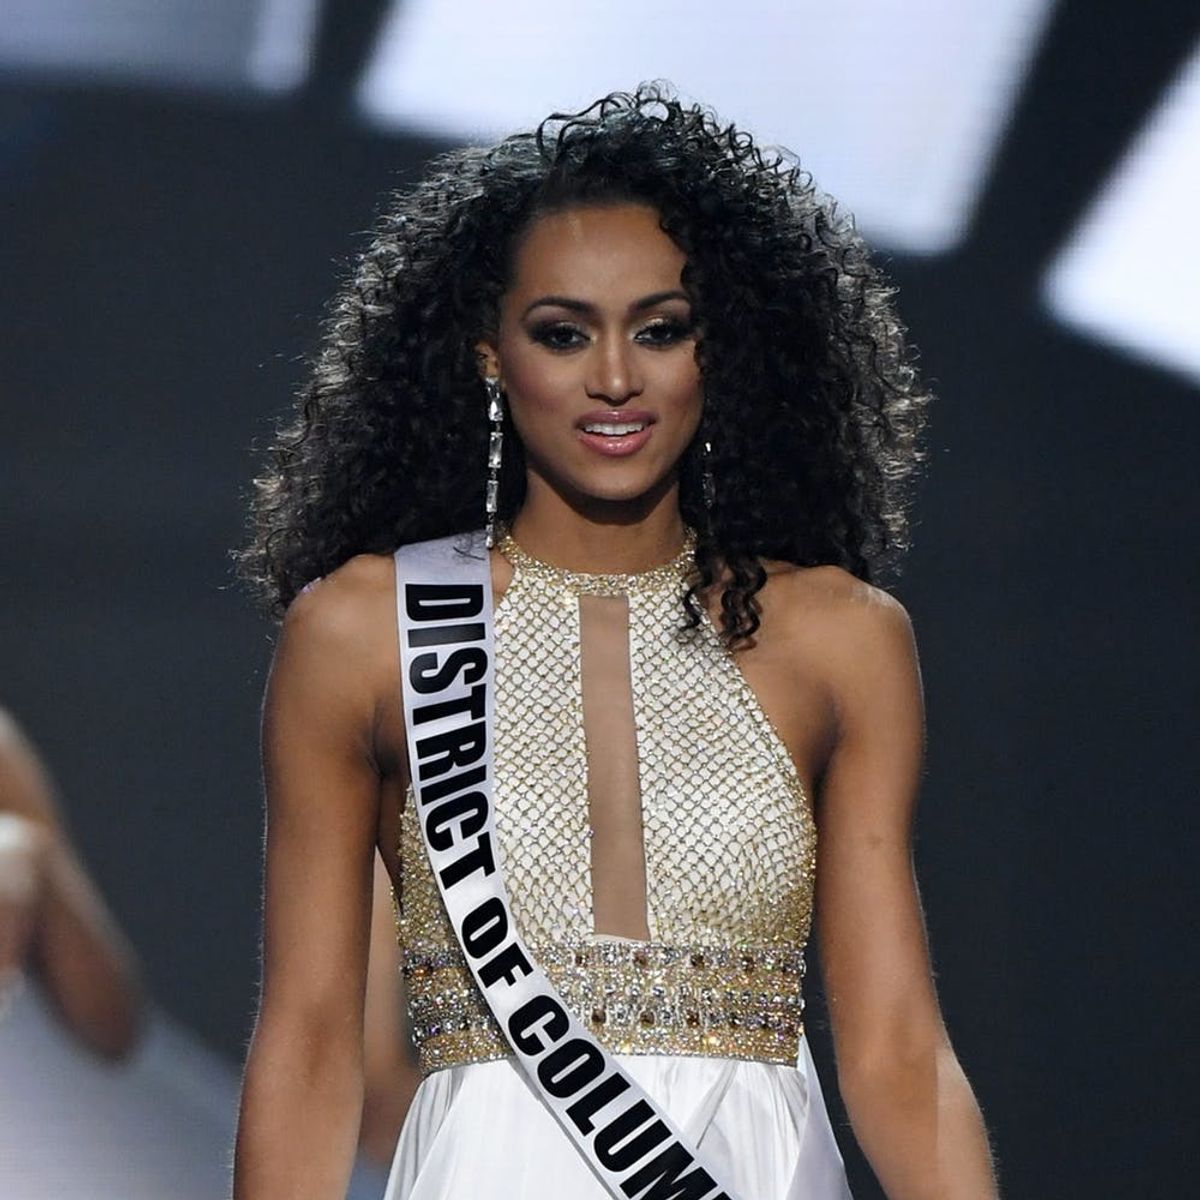 The Internet Is Dragging the New Miss USA for Her Comments Regarding Feminism and Healthcare